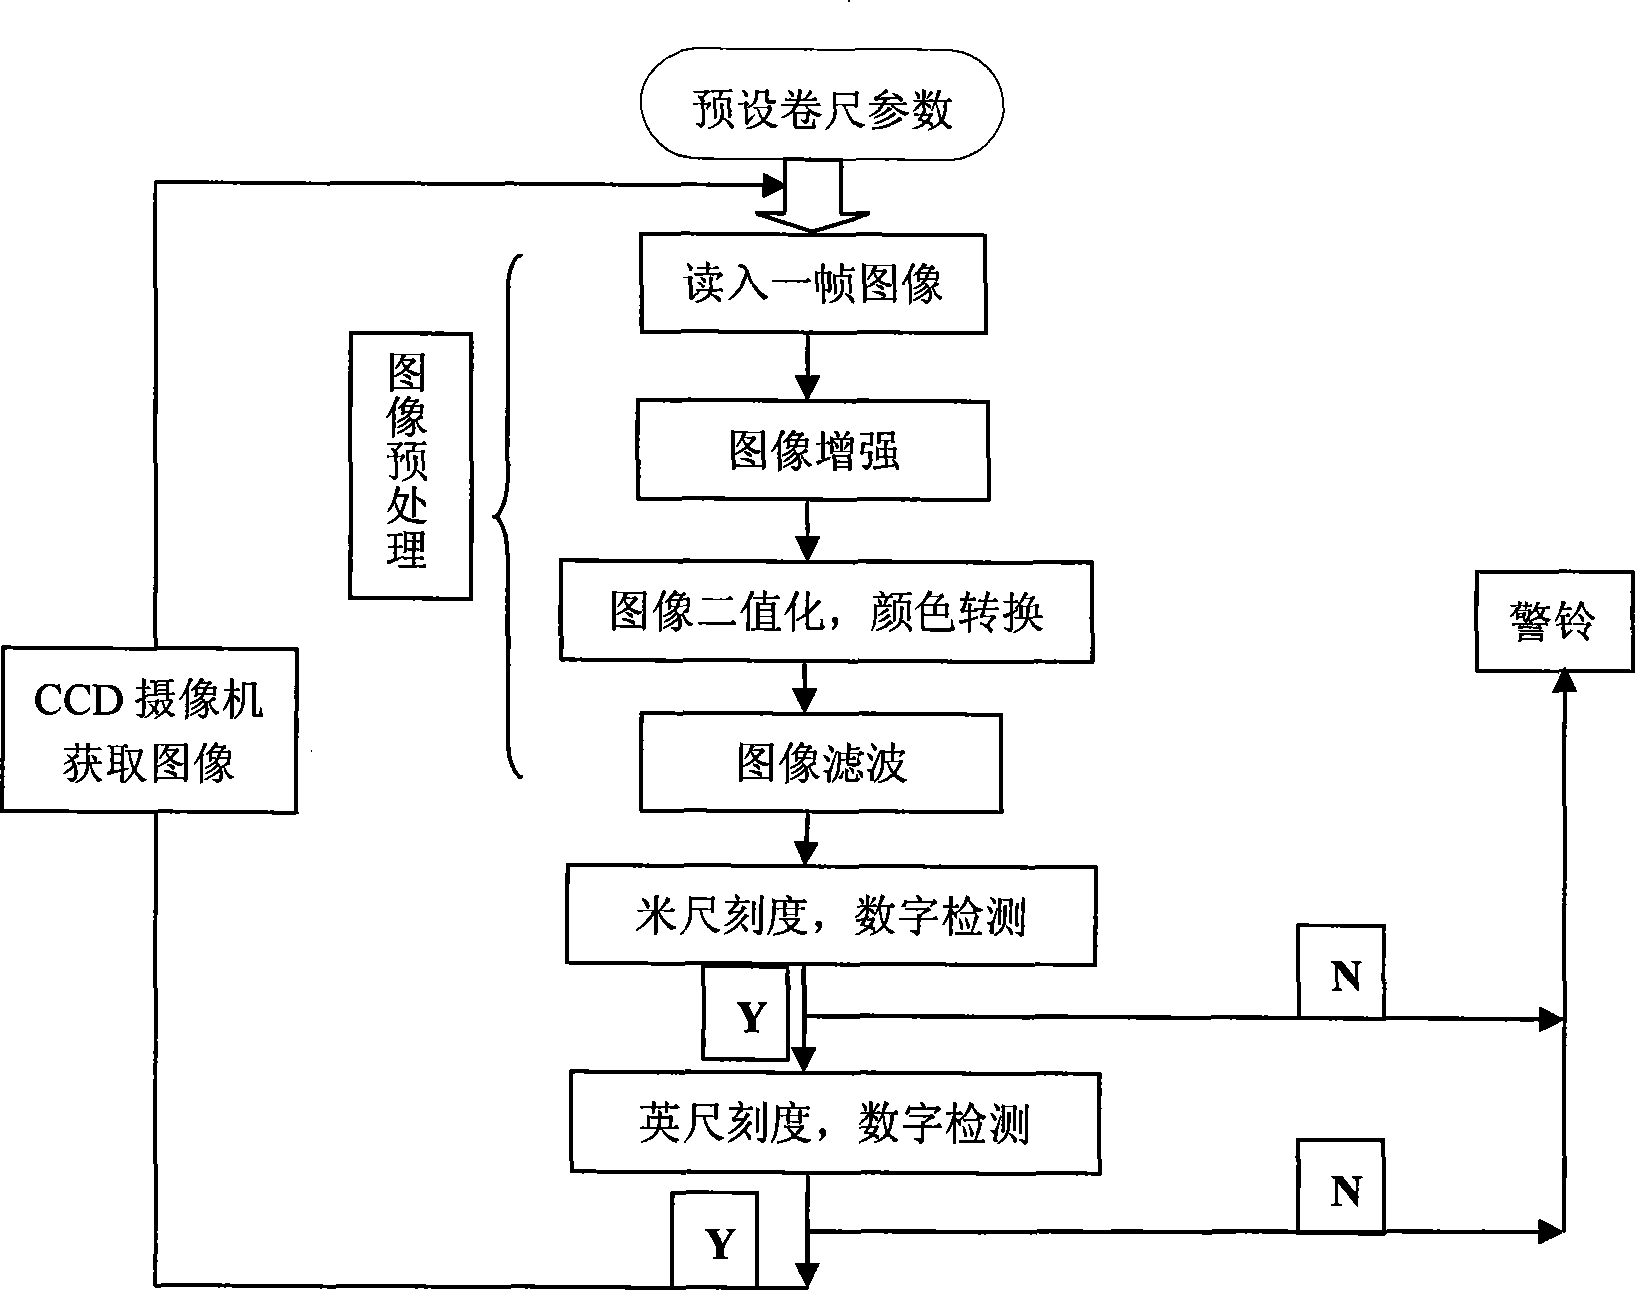 Band tape graduation on-line automatic detection system and method based on image processing